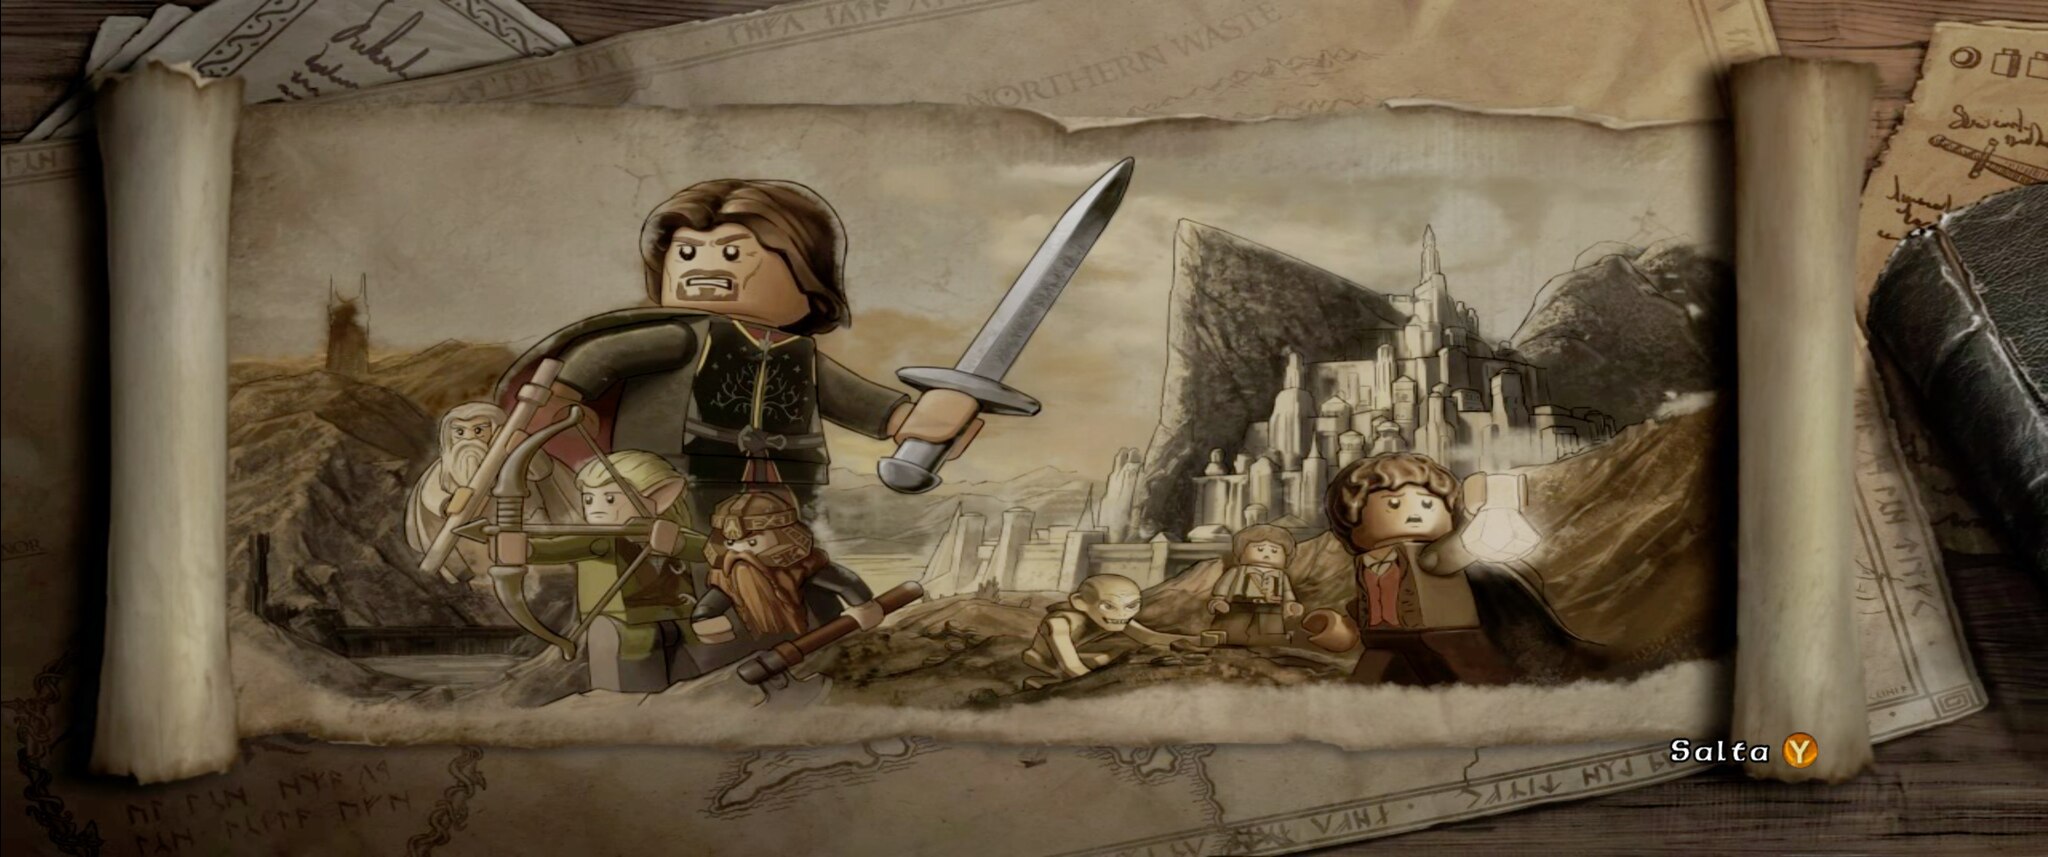 lego lord of the rings game cheat codes